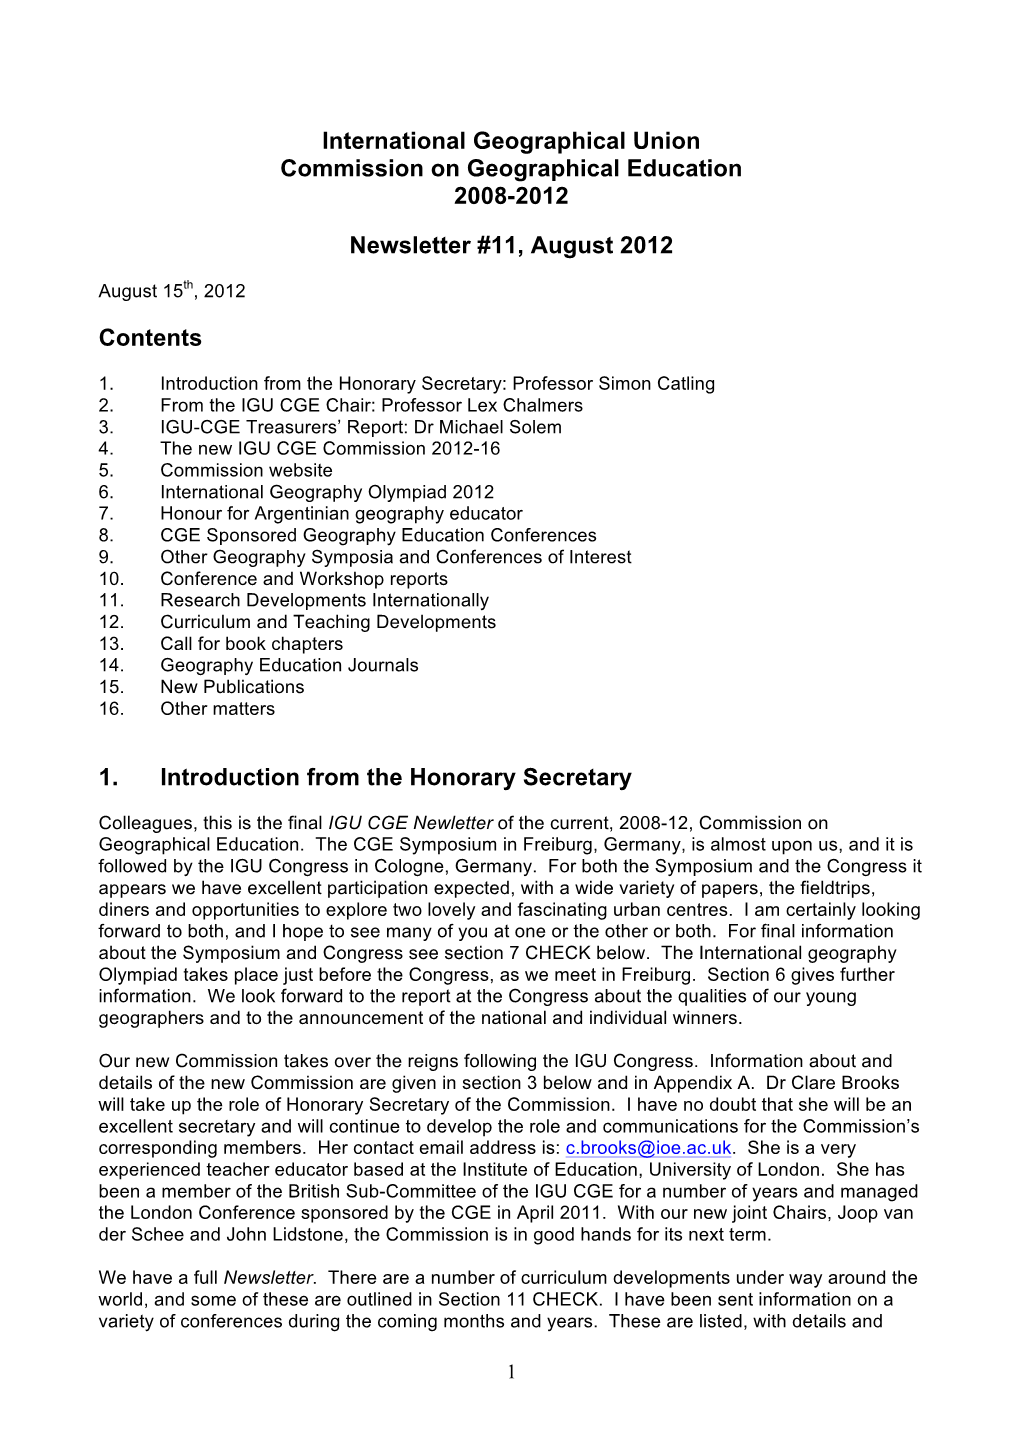 International Geographical Union Commission on Geographical Education 2008-2012 Newsletter #11, August 2012 Contents 1. Introduc